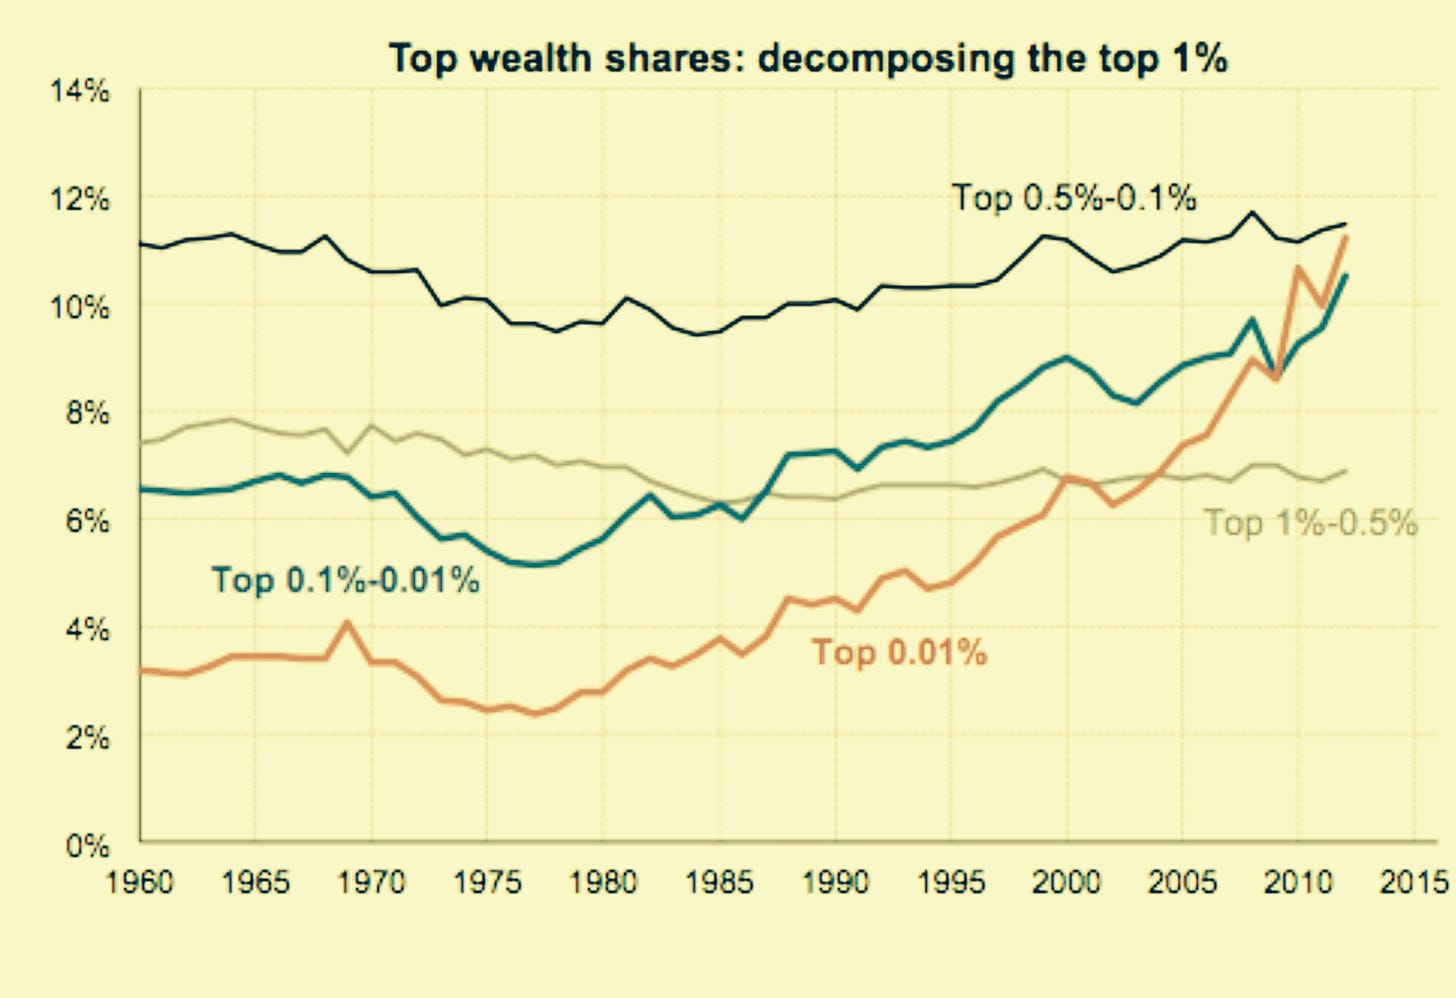 Top wealth shares